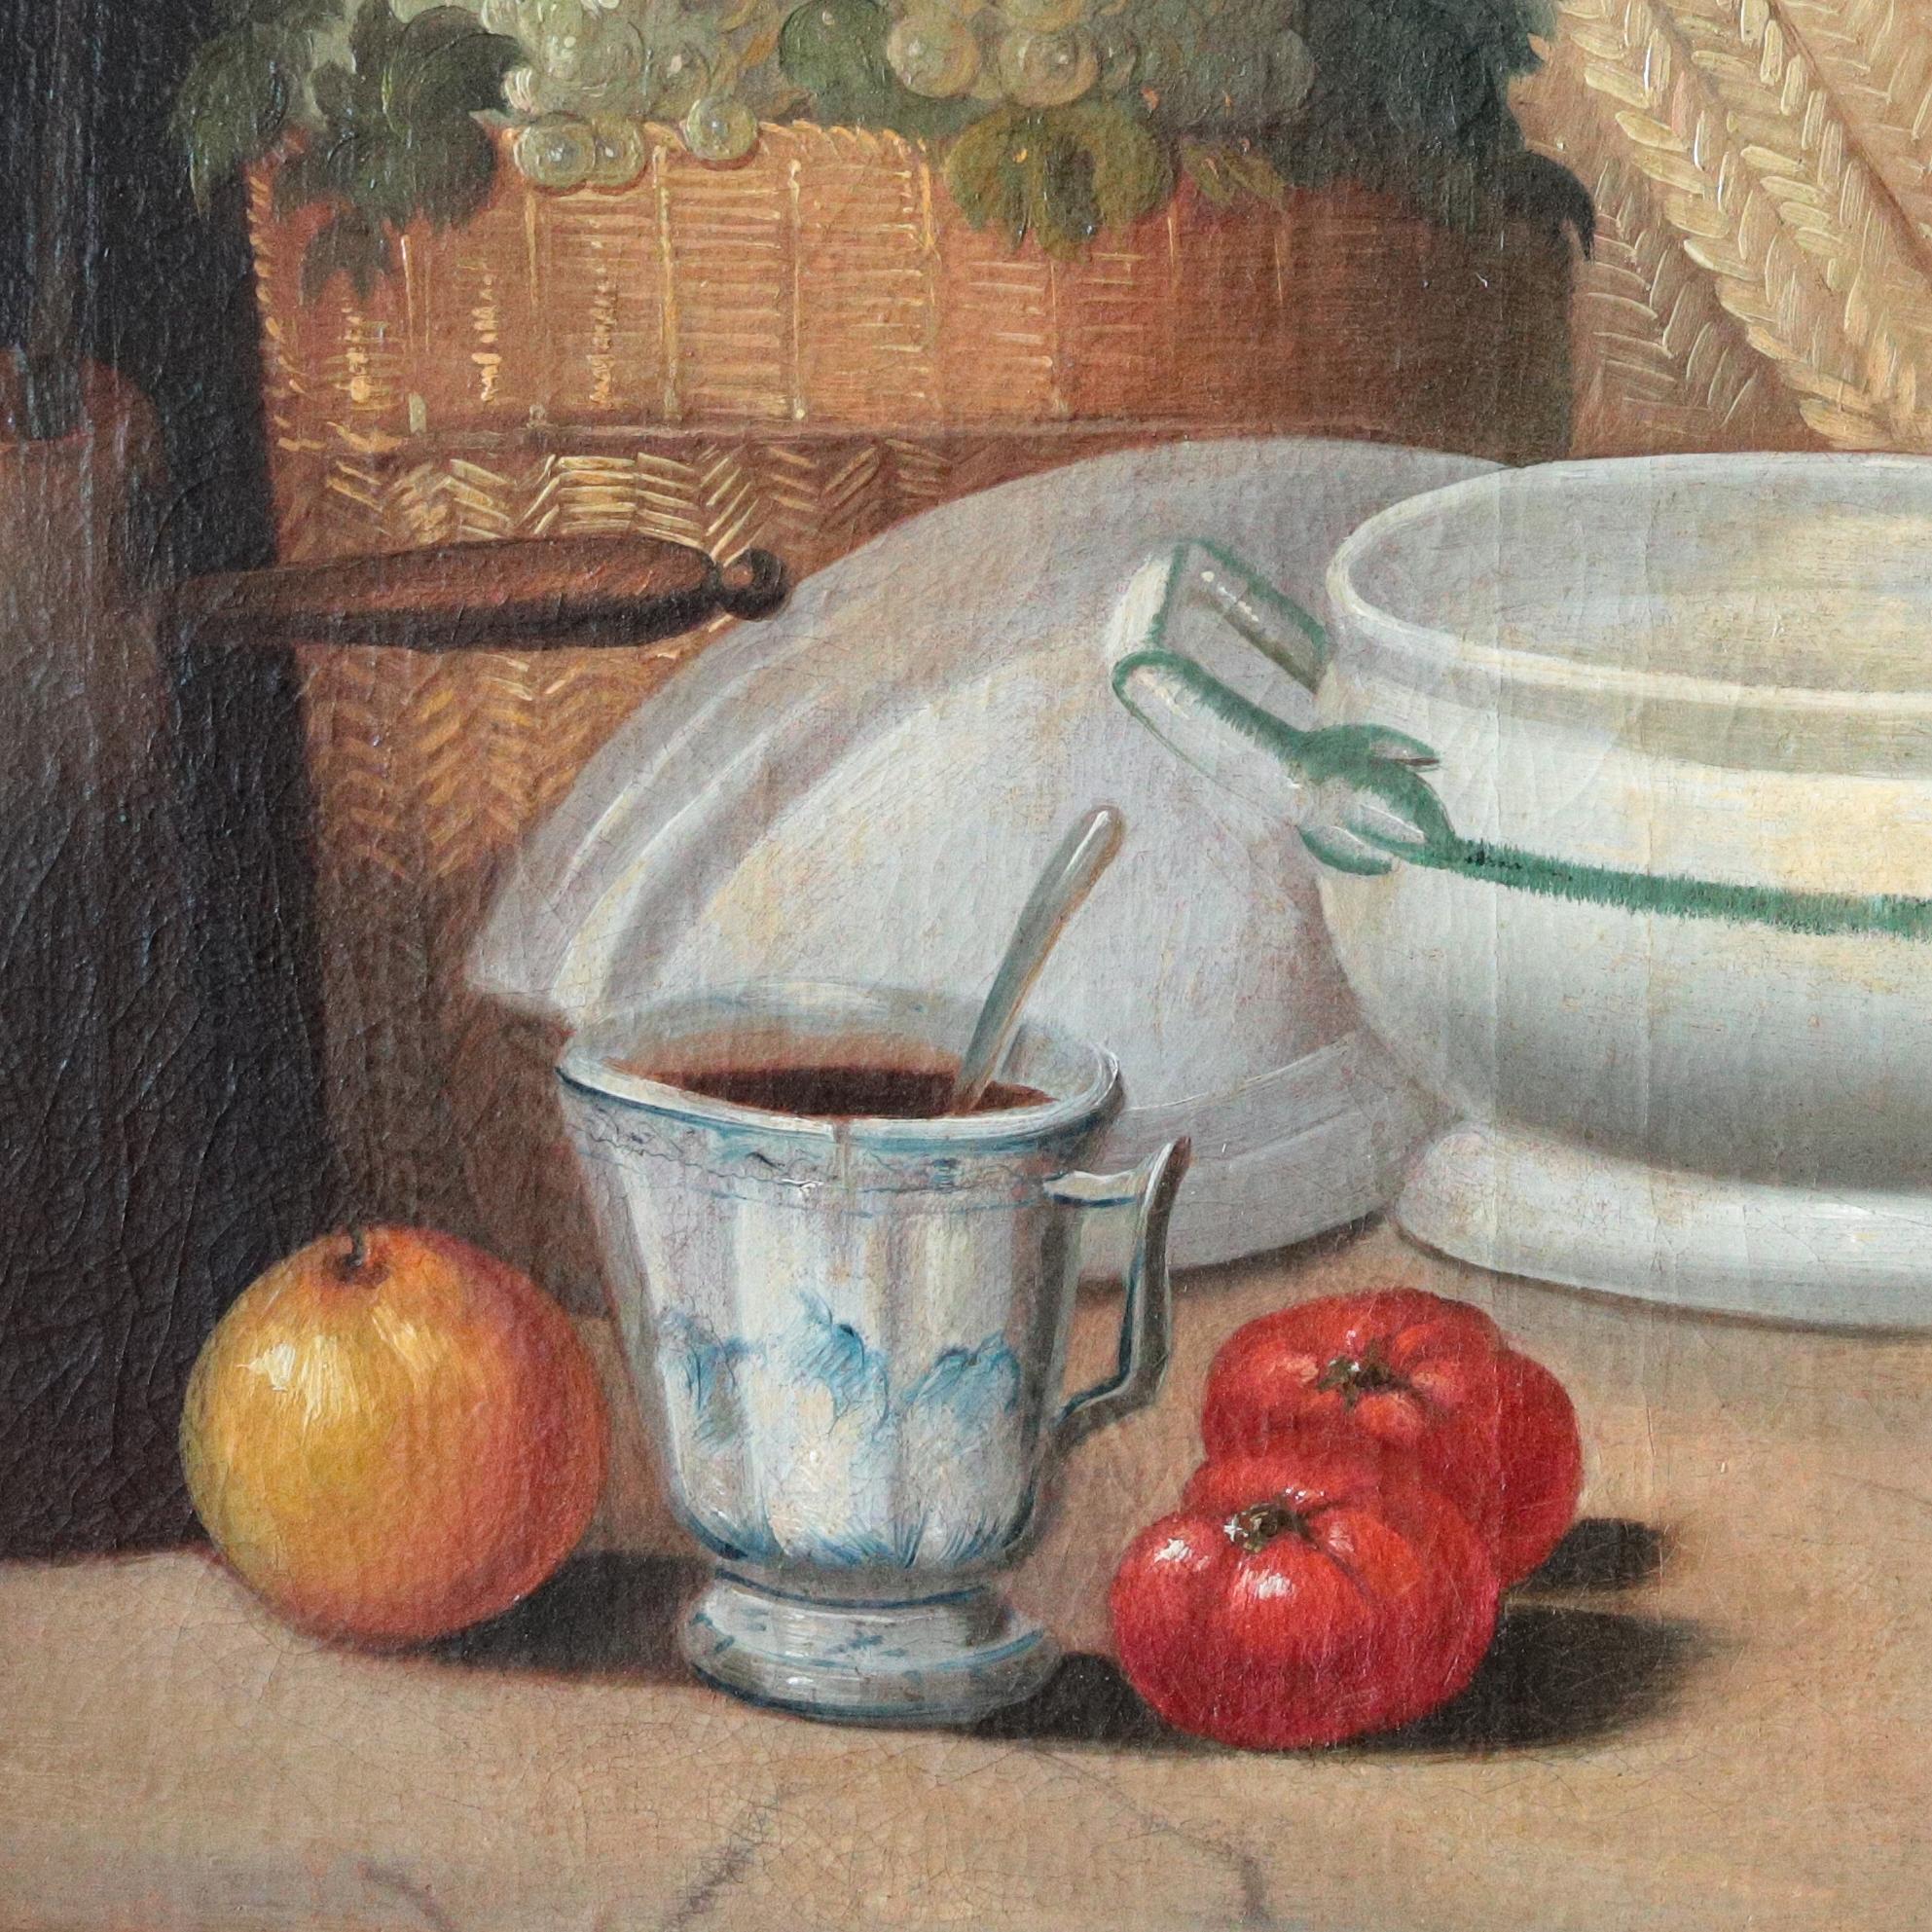  Mediterranean Kitchen Still Life, Italian painting — 18th century oil on canvas - Other Art Style Painting by Unknown